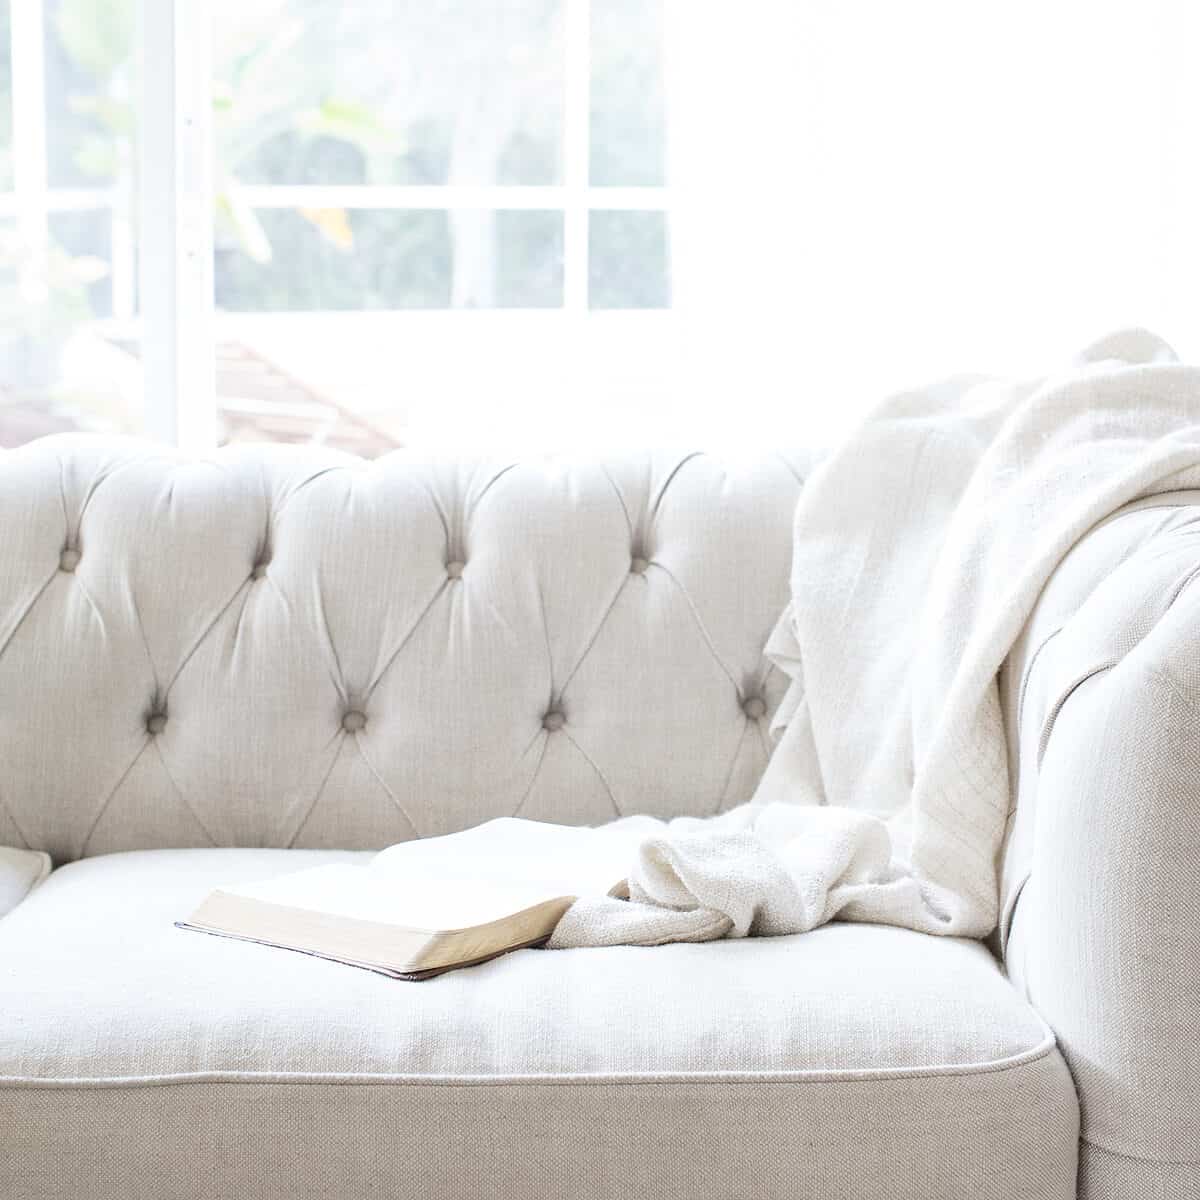 white couch with an open bible and blanket